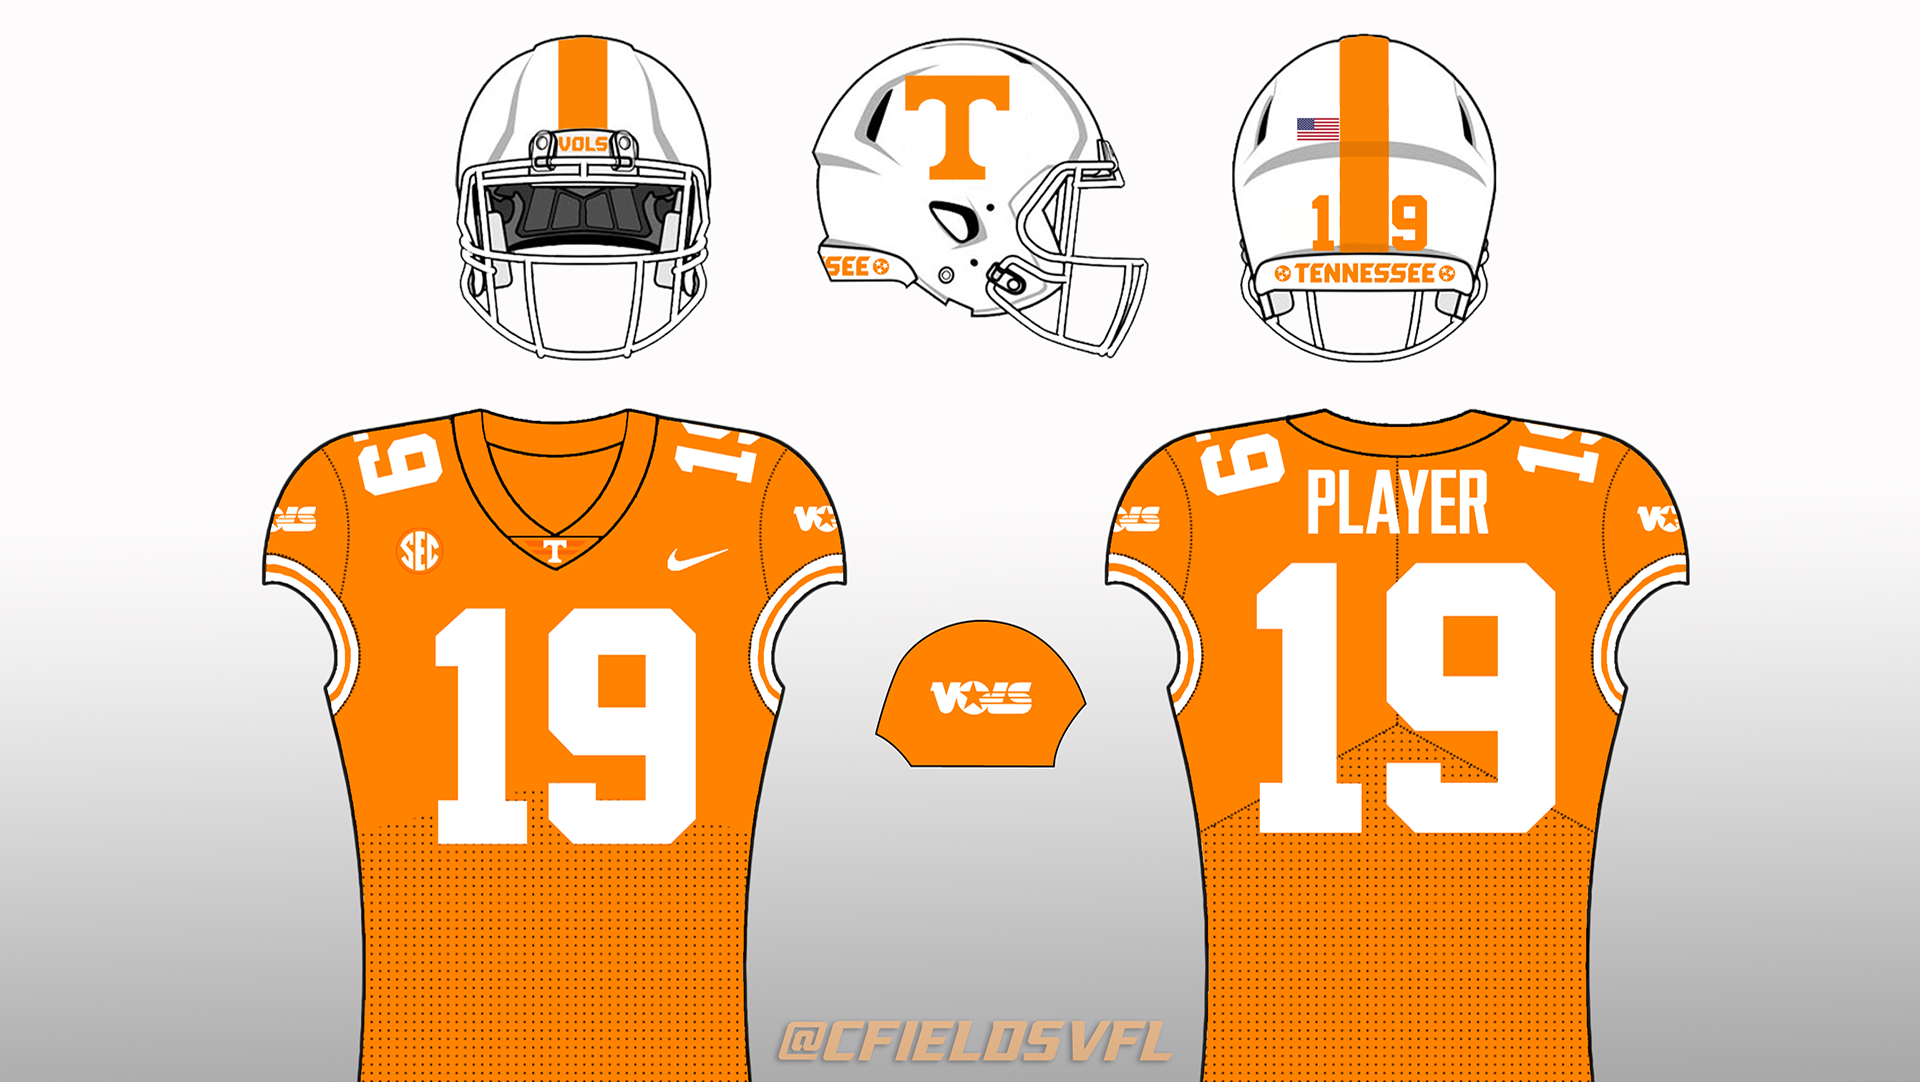 New Tennessee Football Uniforms for 2013 - Rocky Top Talk